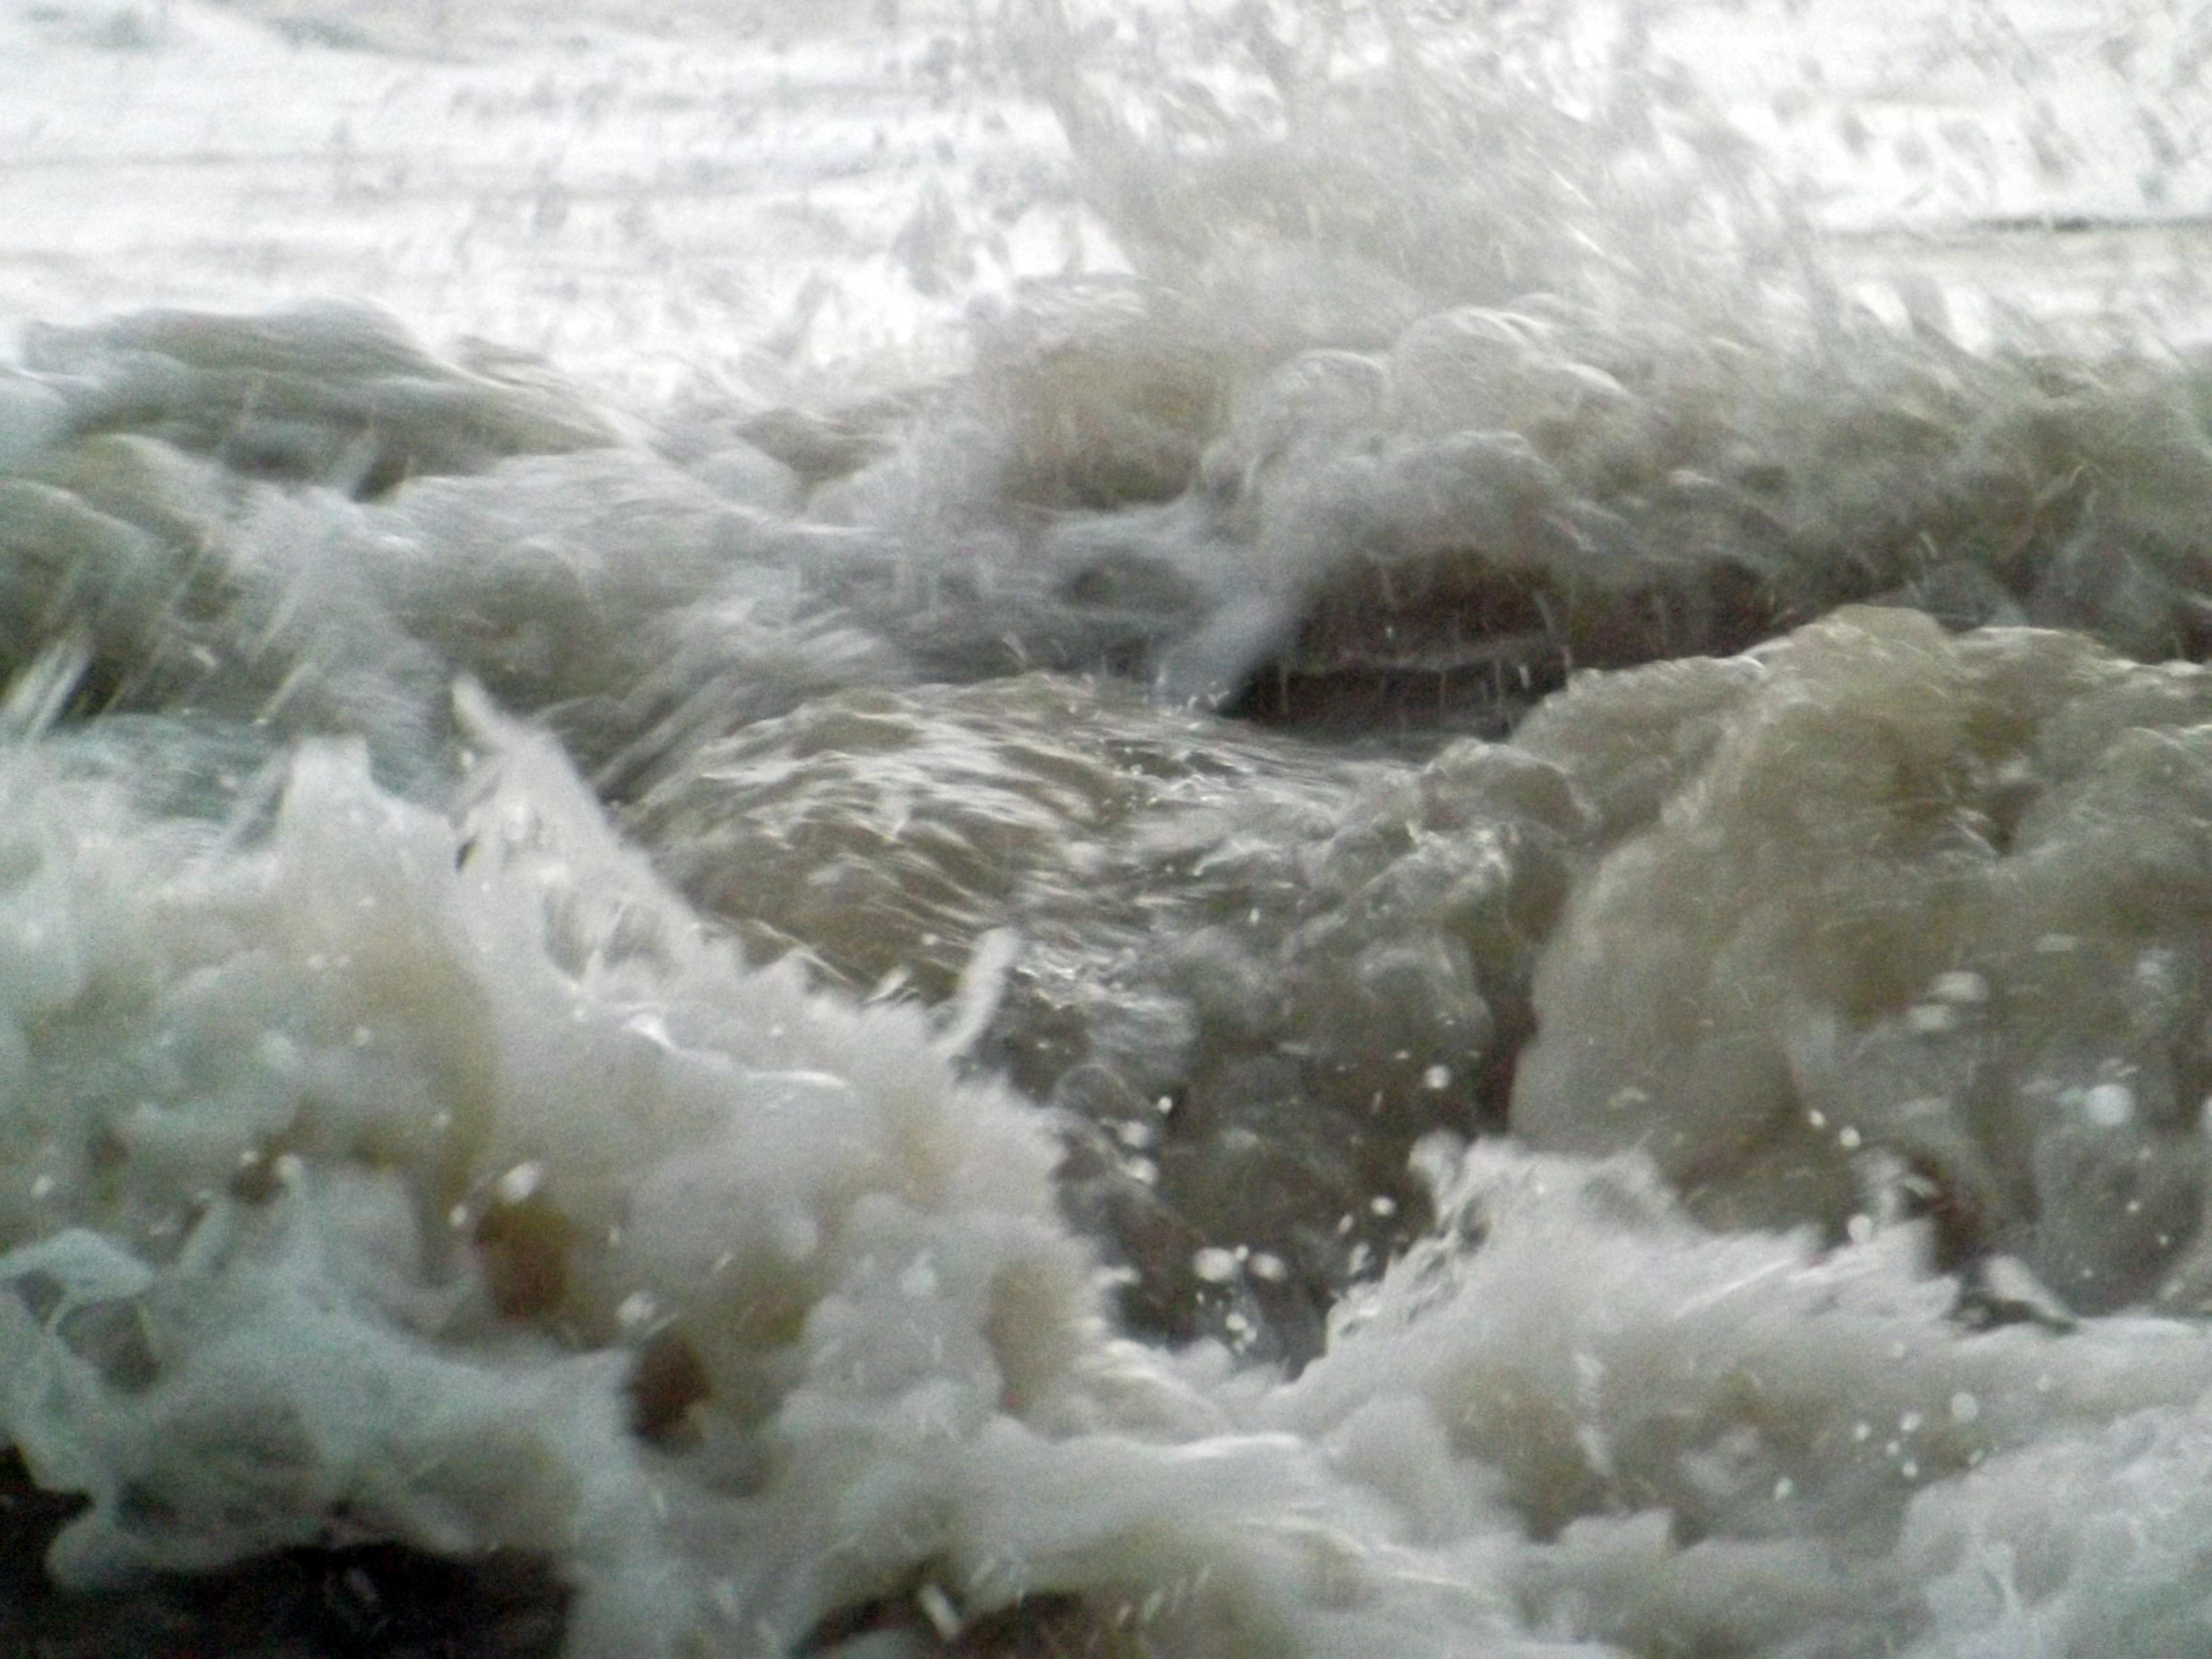 Close up of turbulent, foamy water crashing towards the camera. Grey, white, and light green tones.